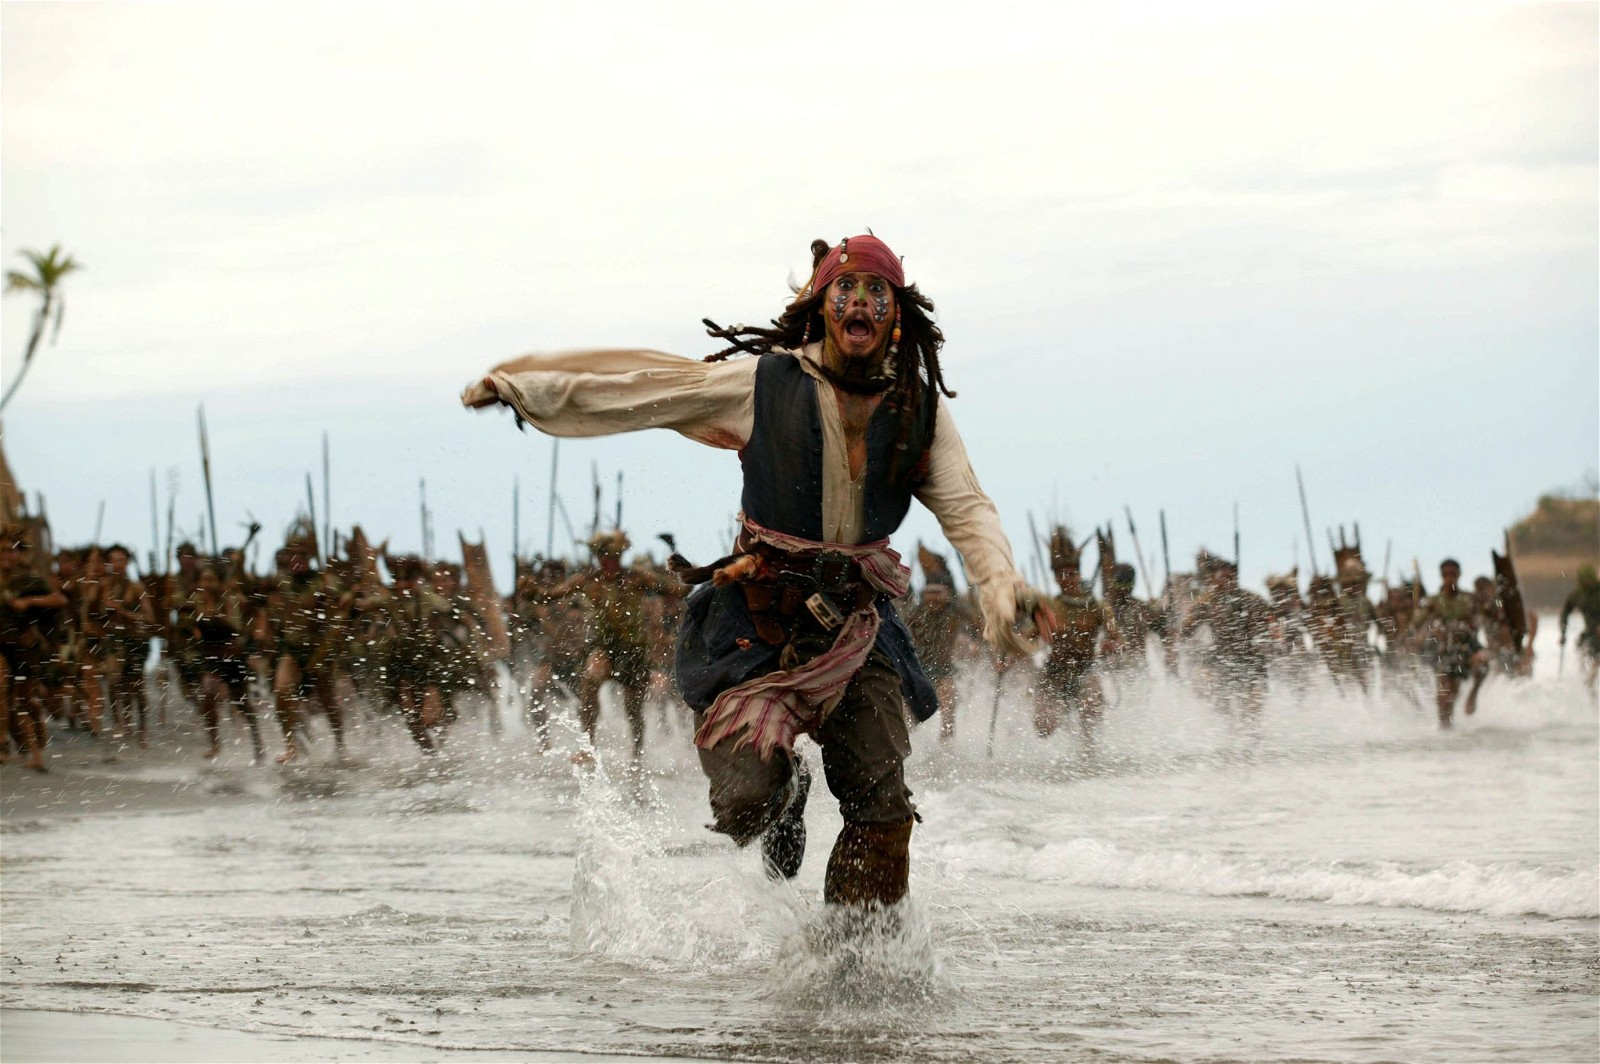 Johnny Depp as Captain Jack Sparrow in Pirates of the Caribbean franchise.